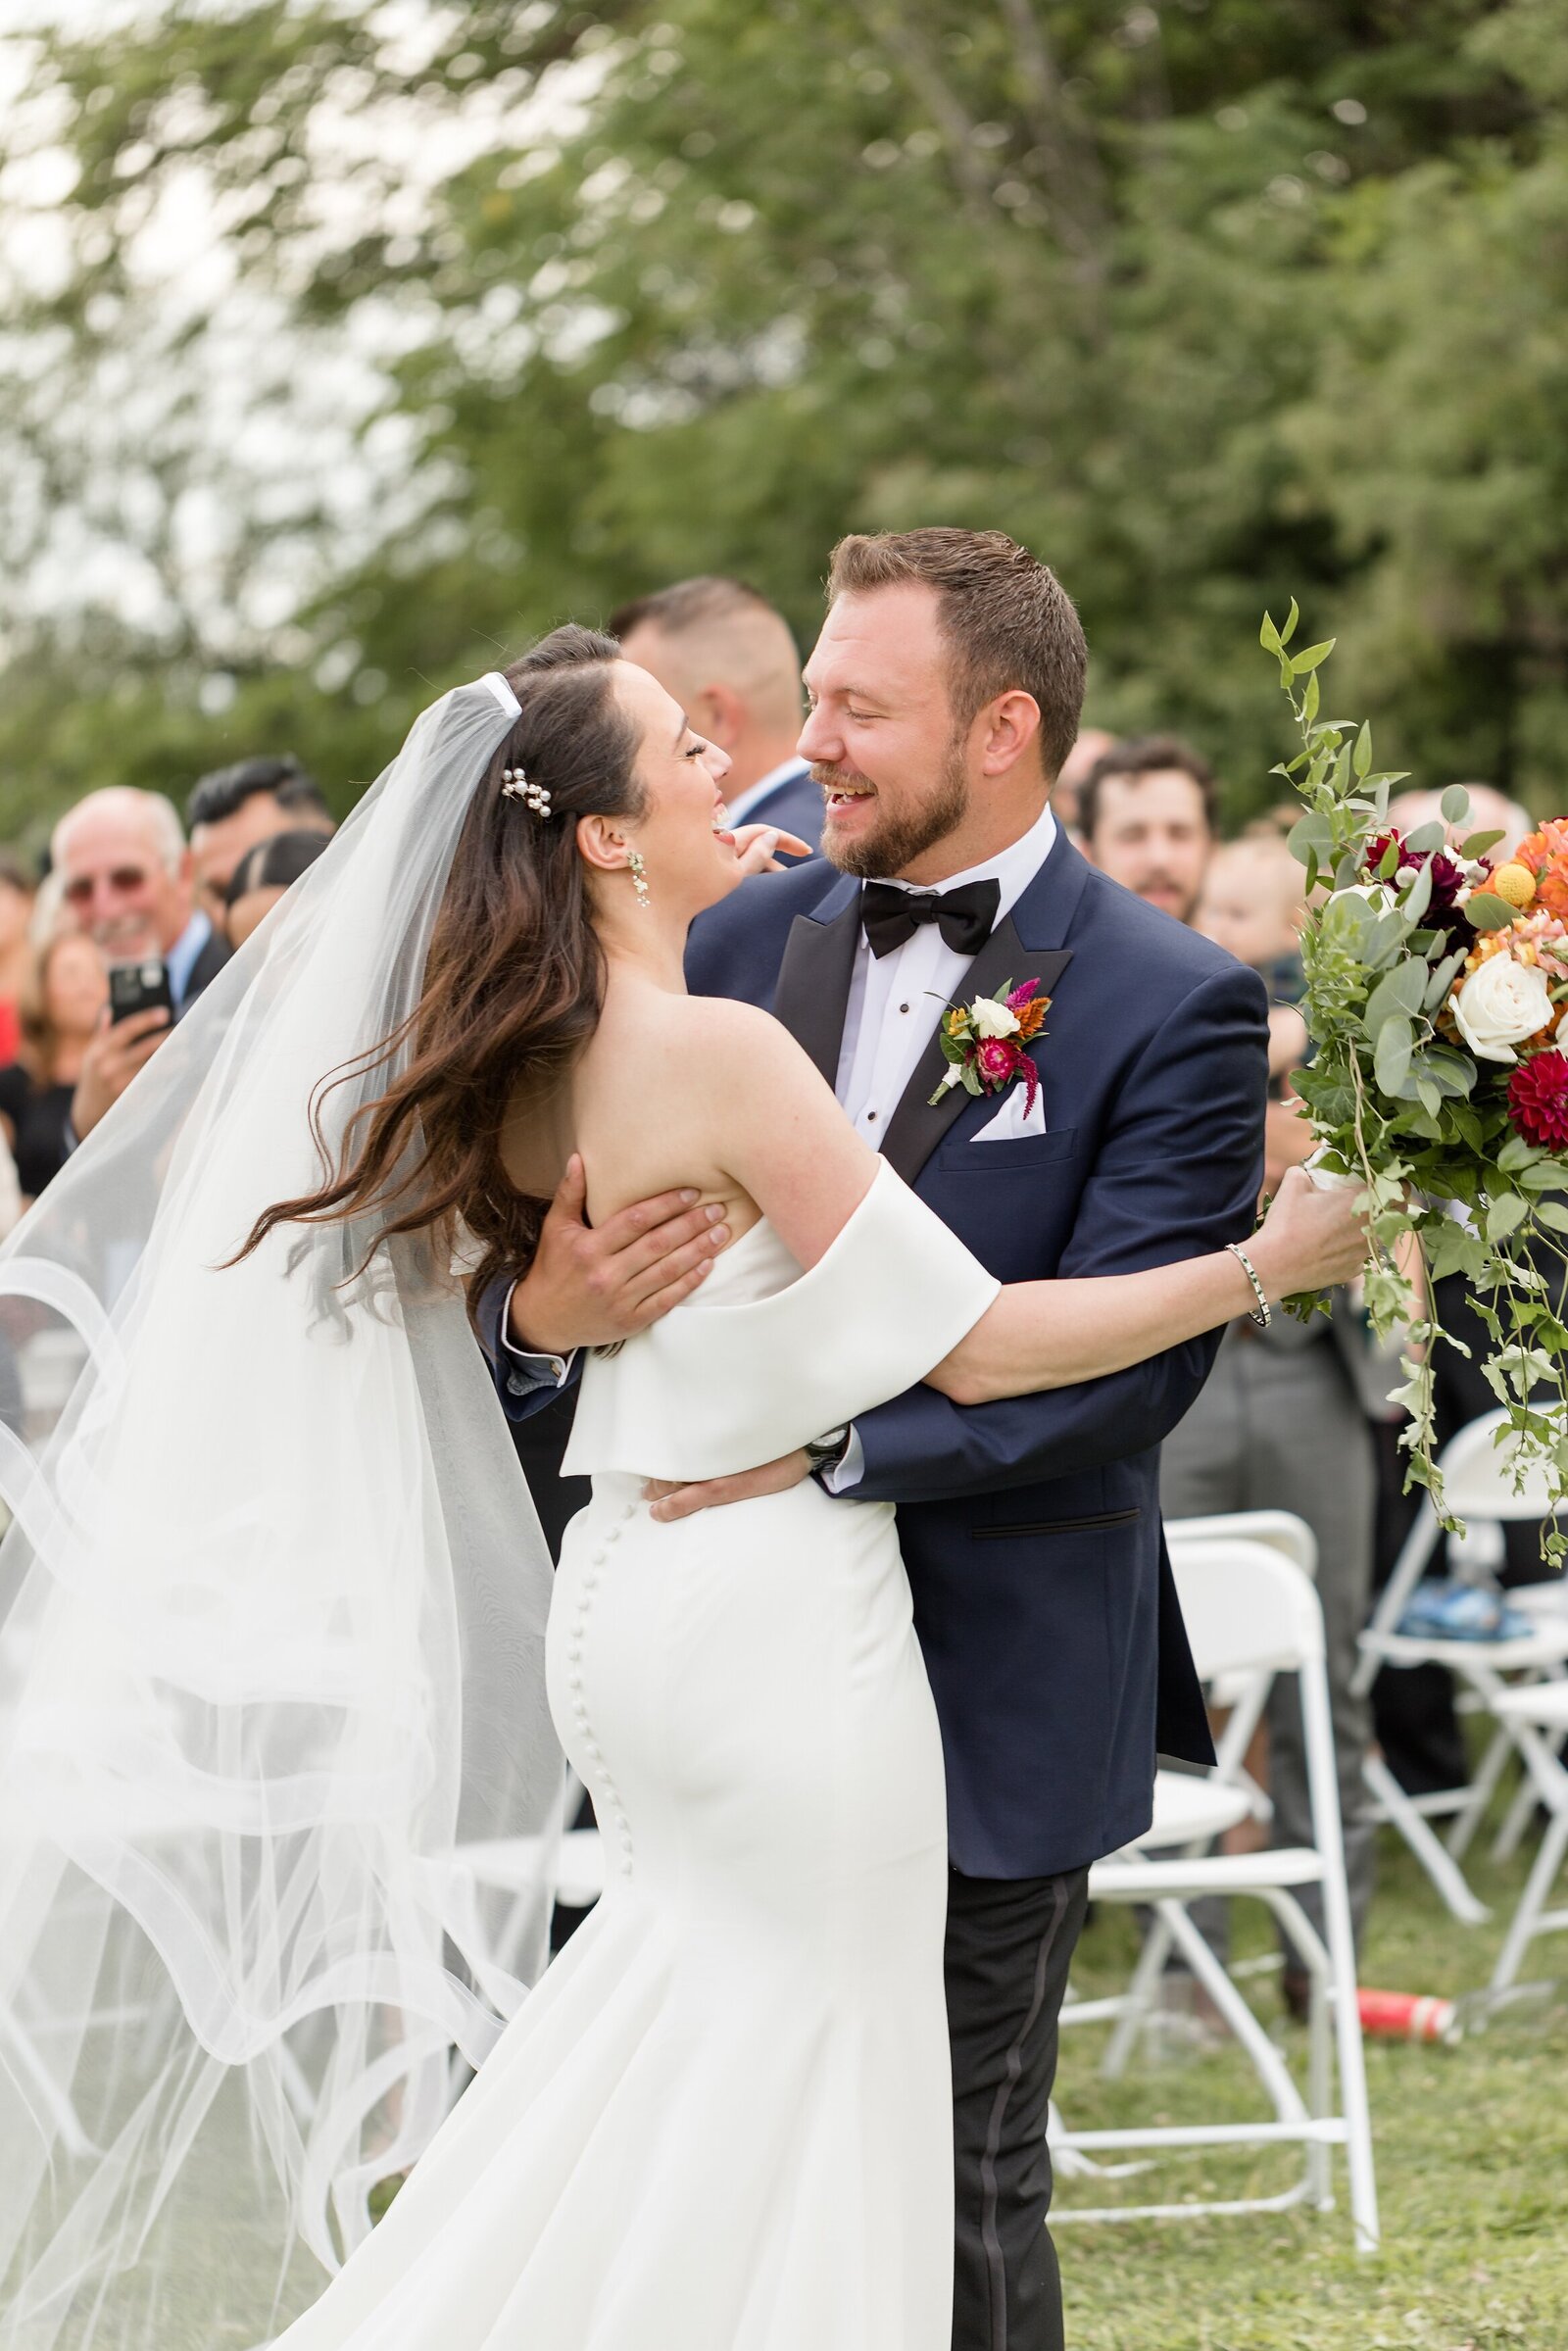 Groom-Embraces-his-newly-wed-Jewish-Bride-after-their-wedding-ceremony